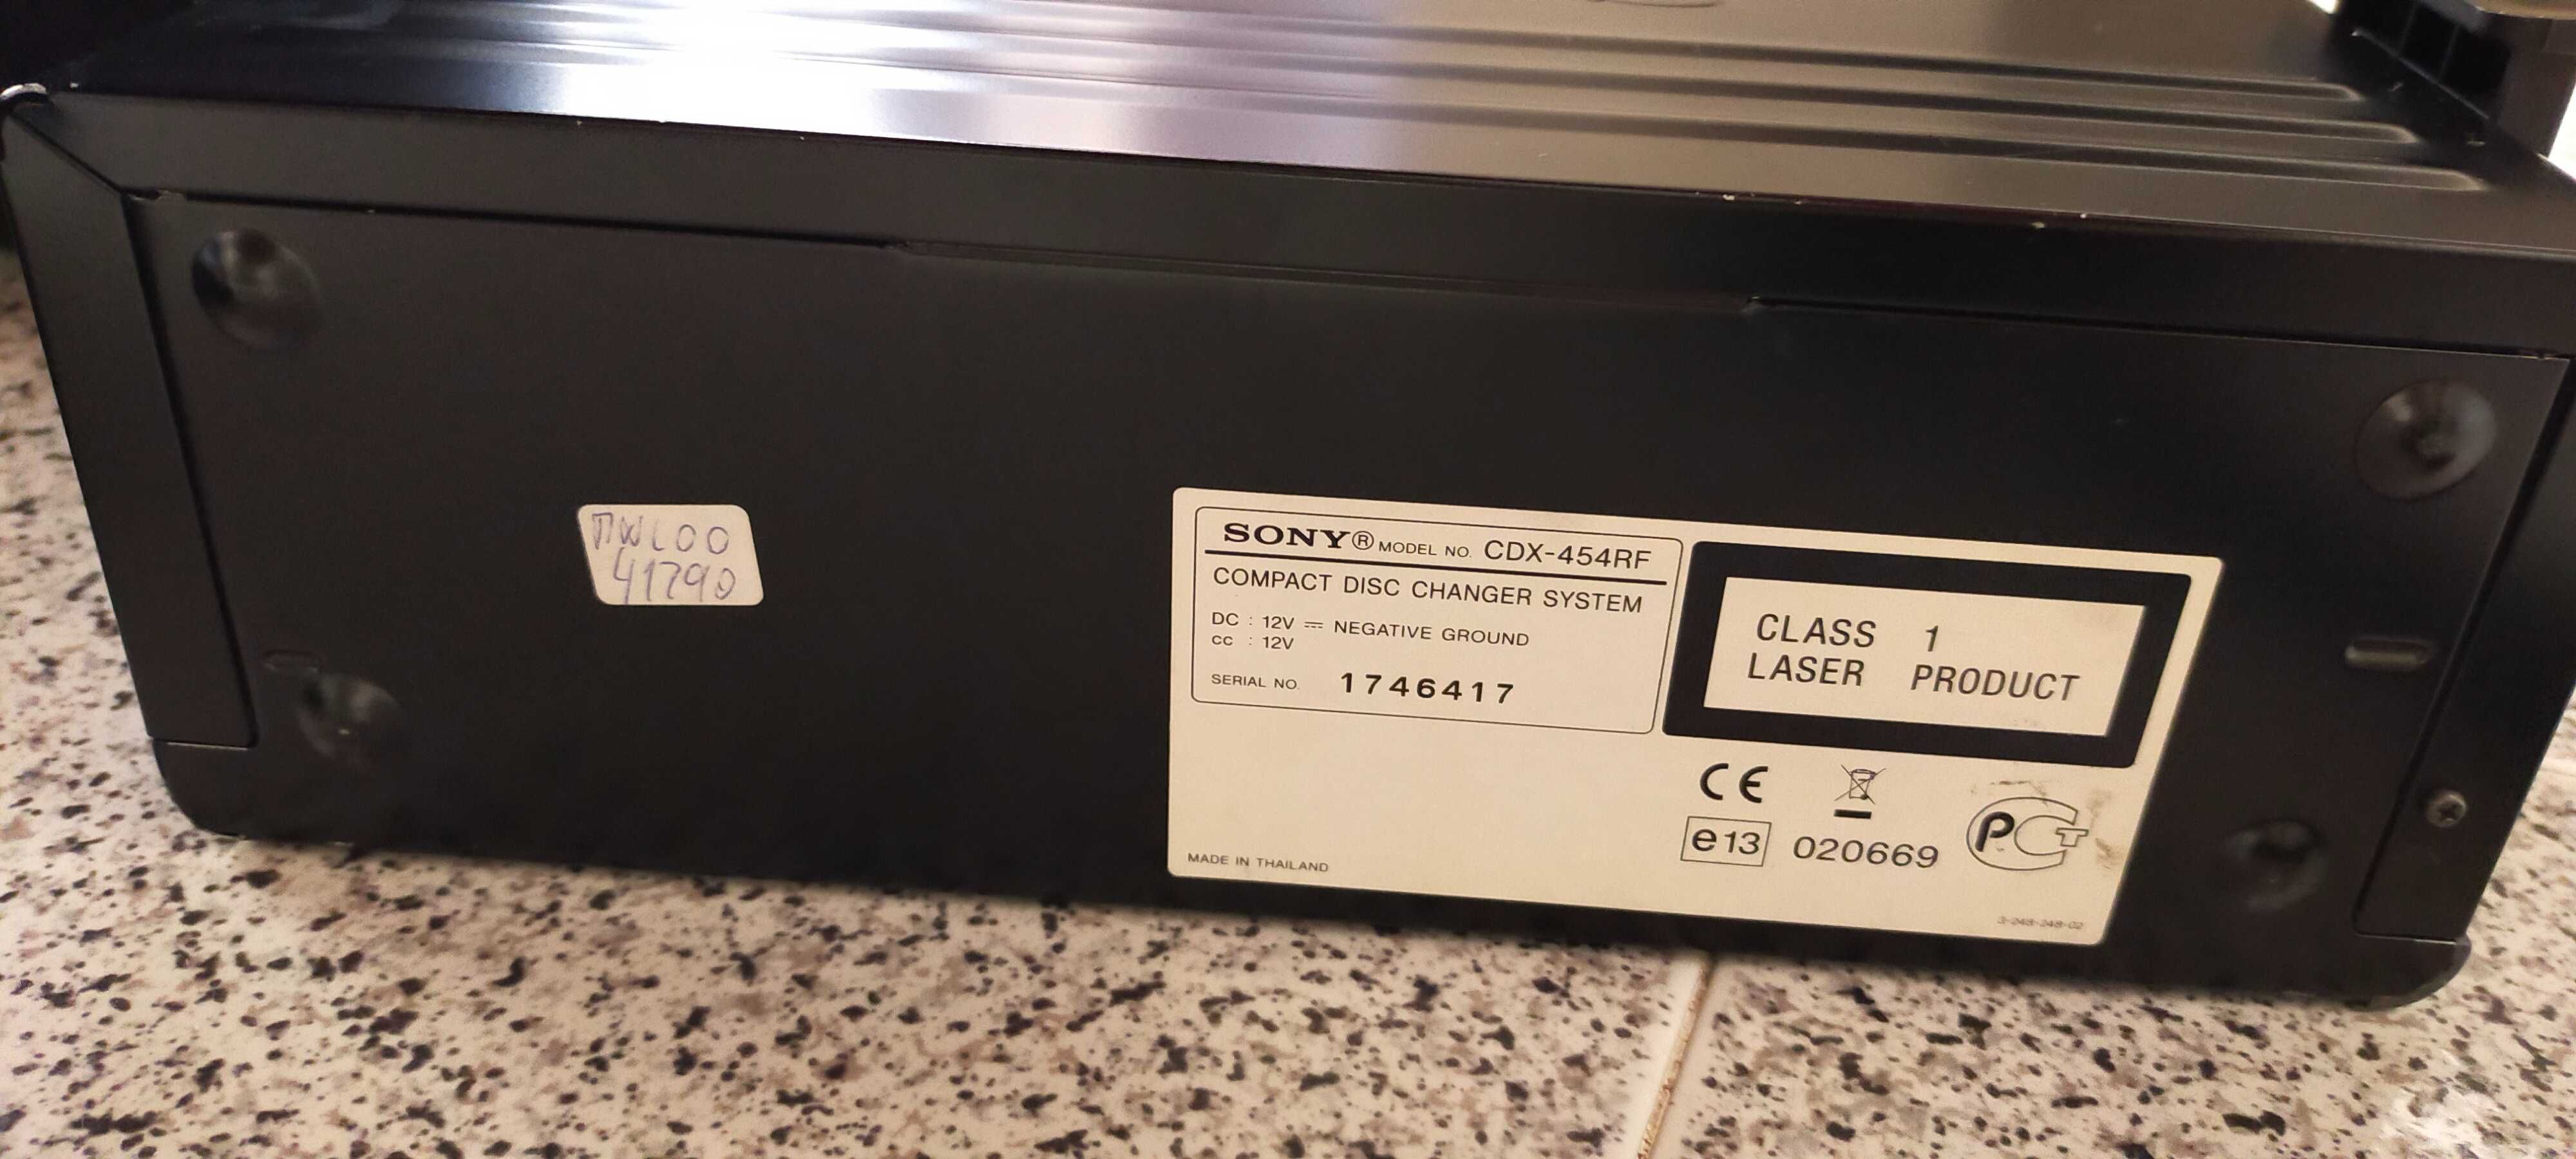 Sony CDX-454RF Compact 10 Disc Changer System